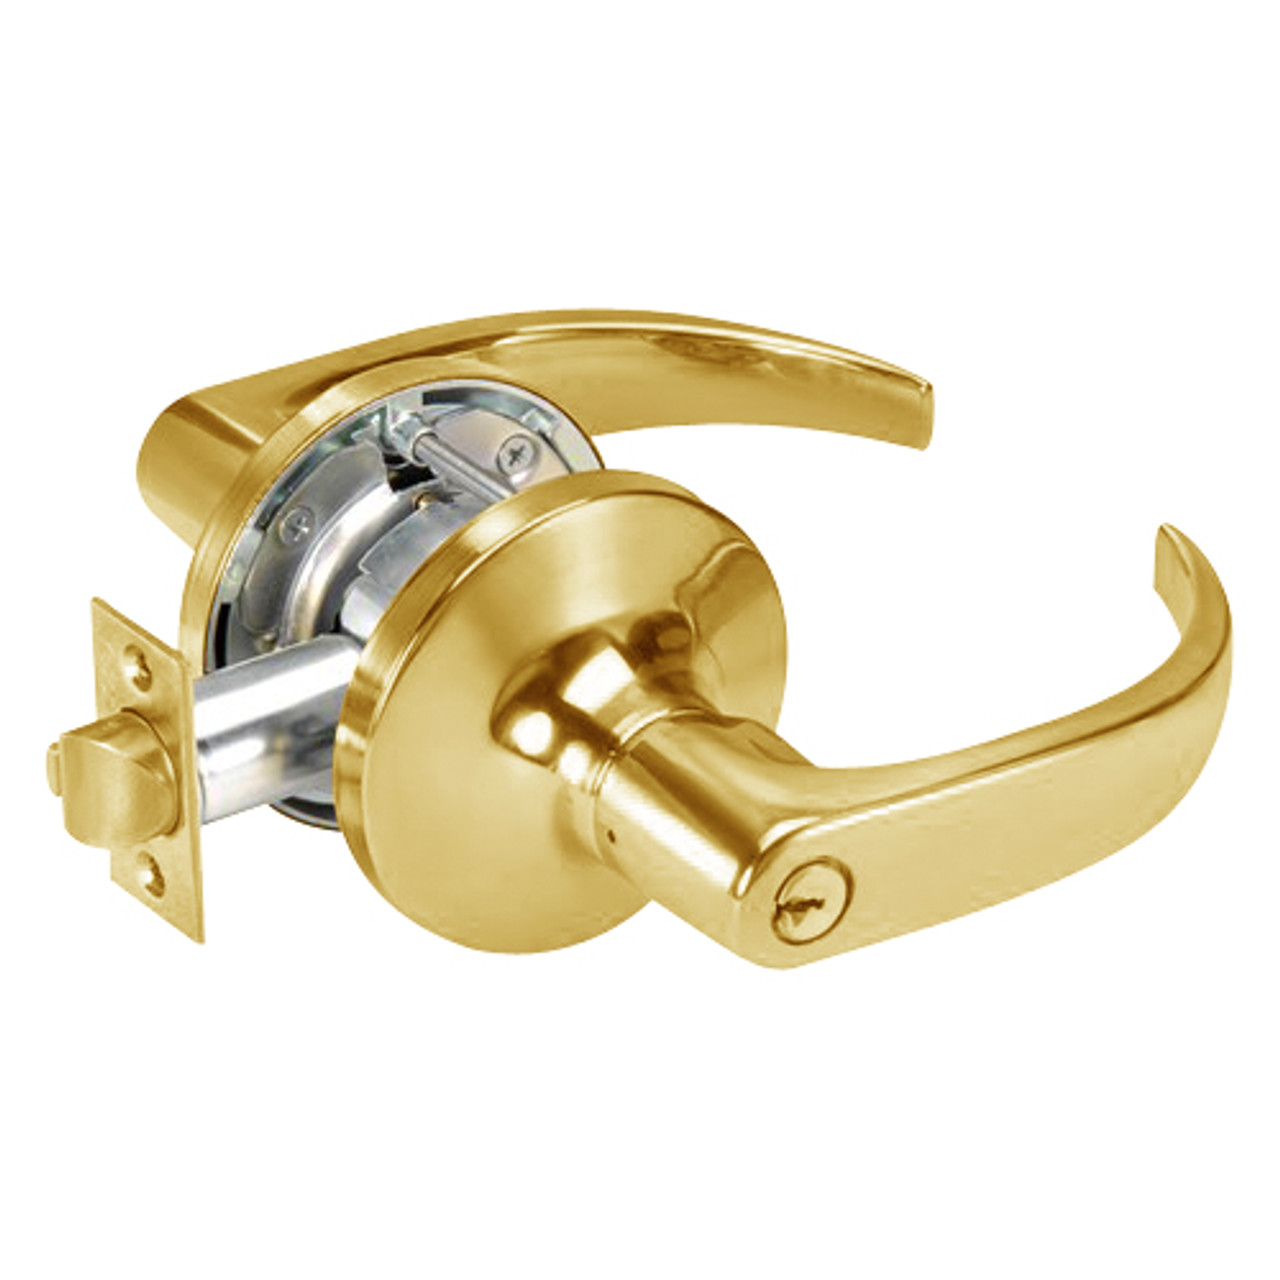 PB5407LN-605 Yale 5400LN Series Single Cylinder Entry Cylindrical Lock with Pacific Beach Lever in Bright Brass